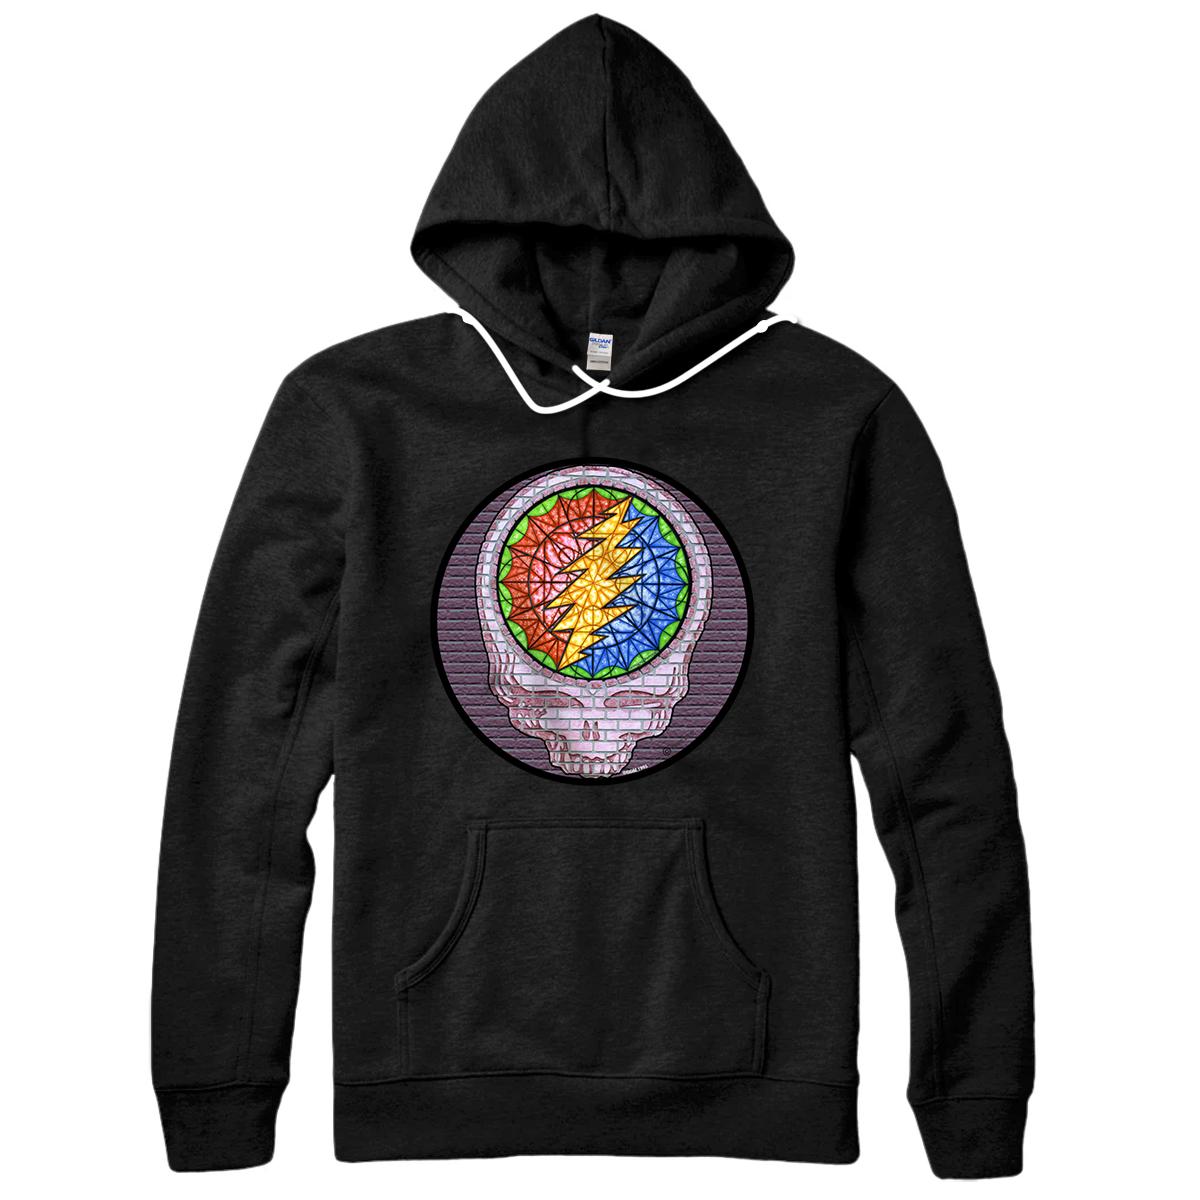 Personalized Brickface SYF - Not Fade Away Grateful Tortuga Apparel Pullover Hoodie